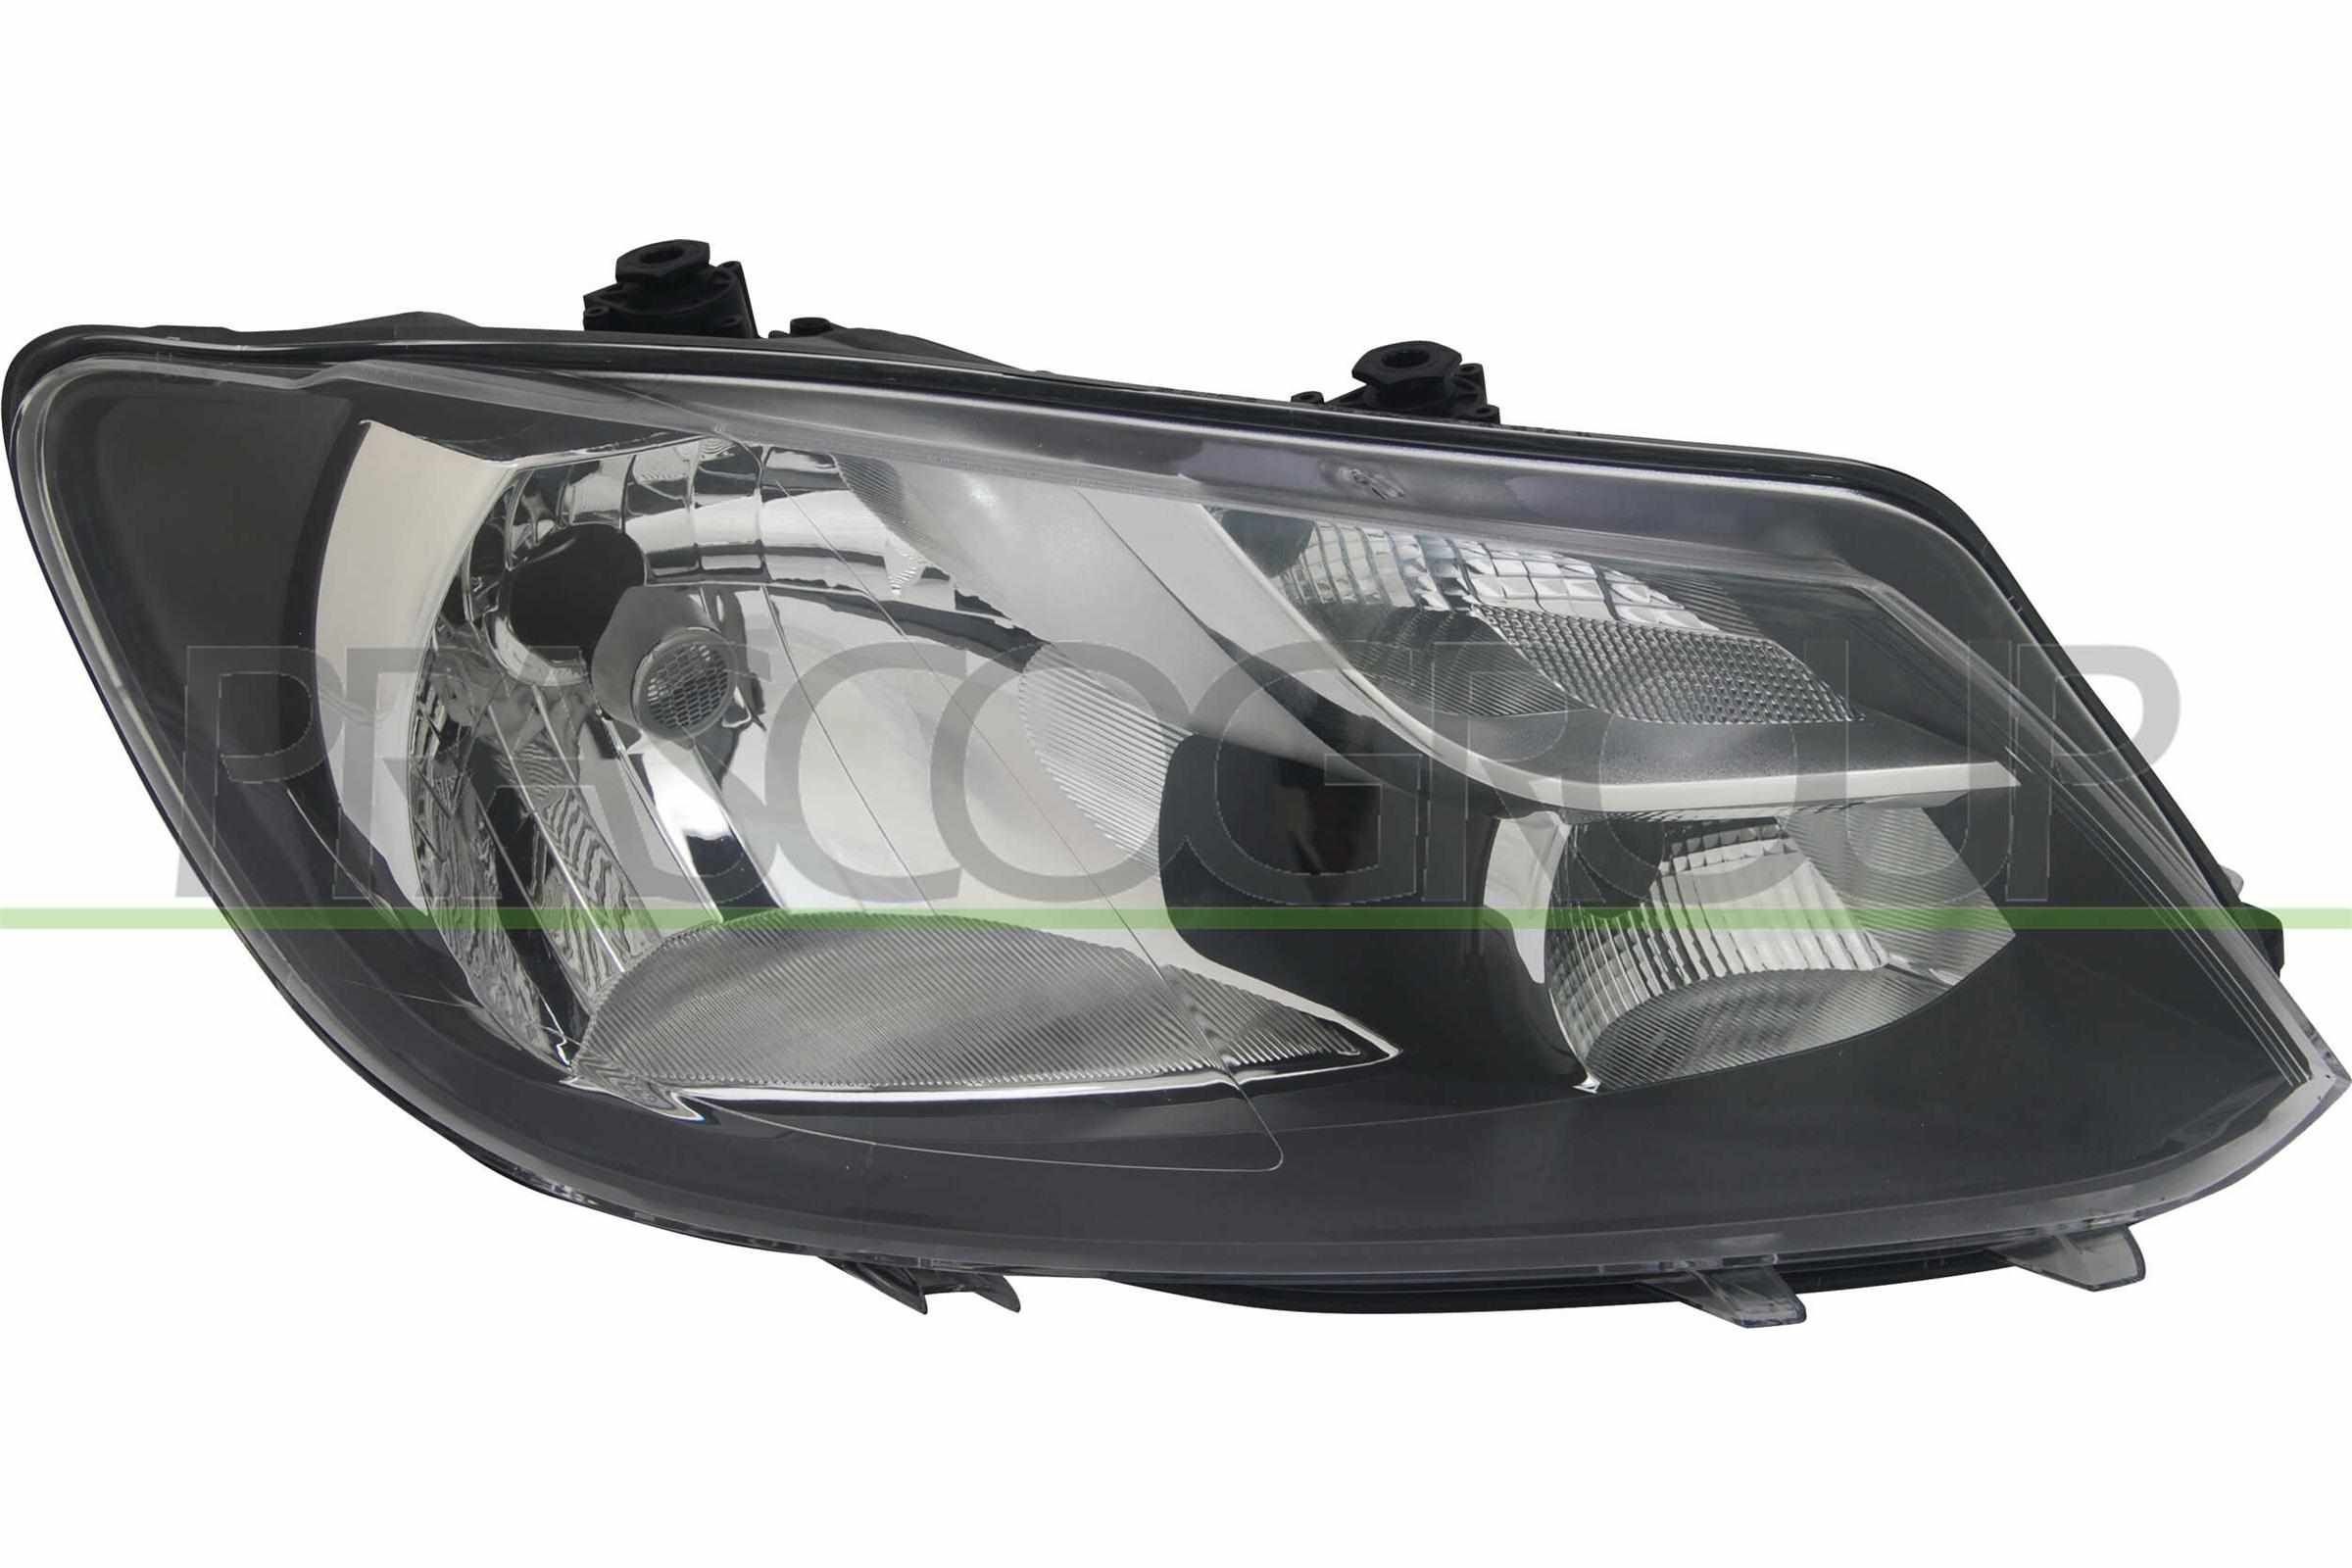 PRASCO VG9064803 Headlight Right, H4, with motor for headlamp levelling